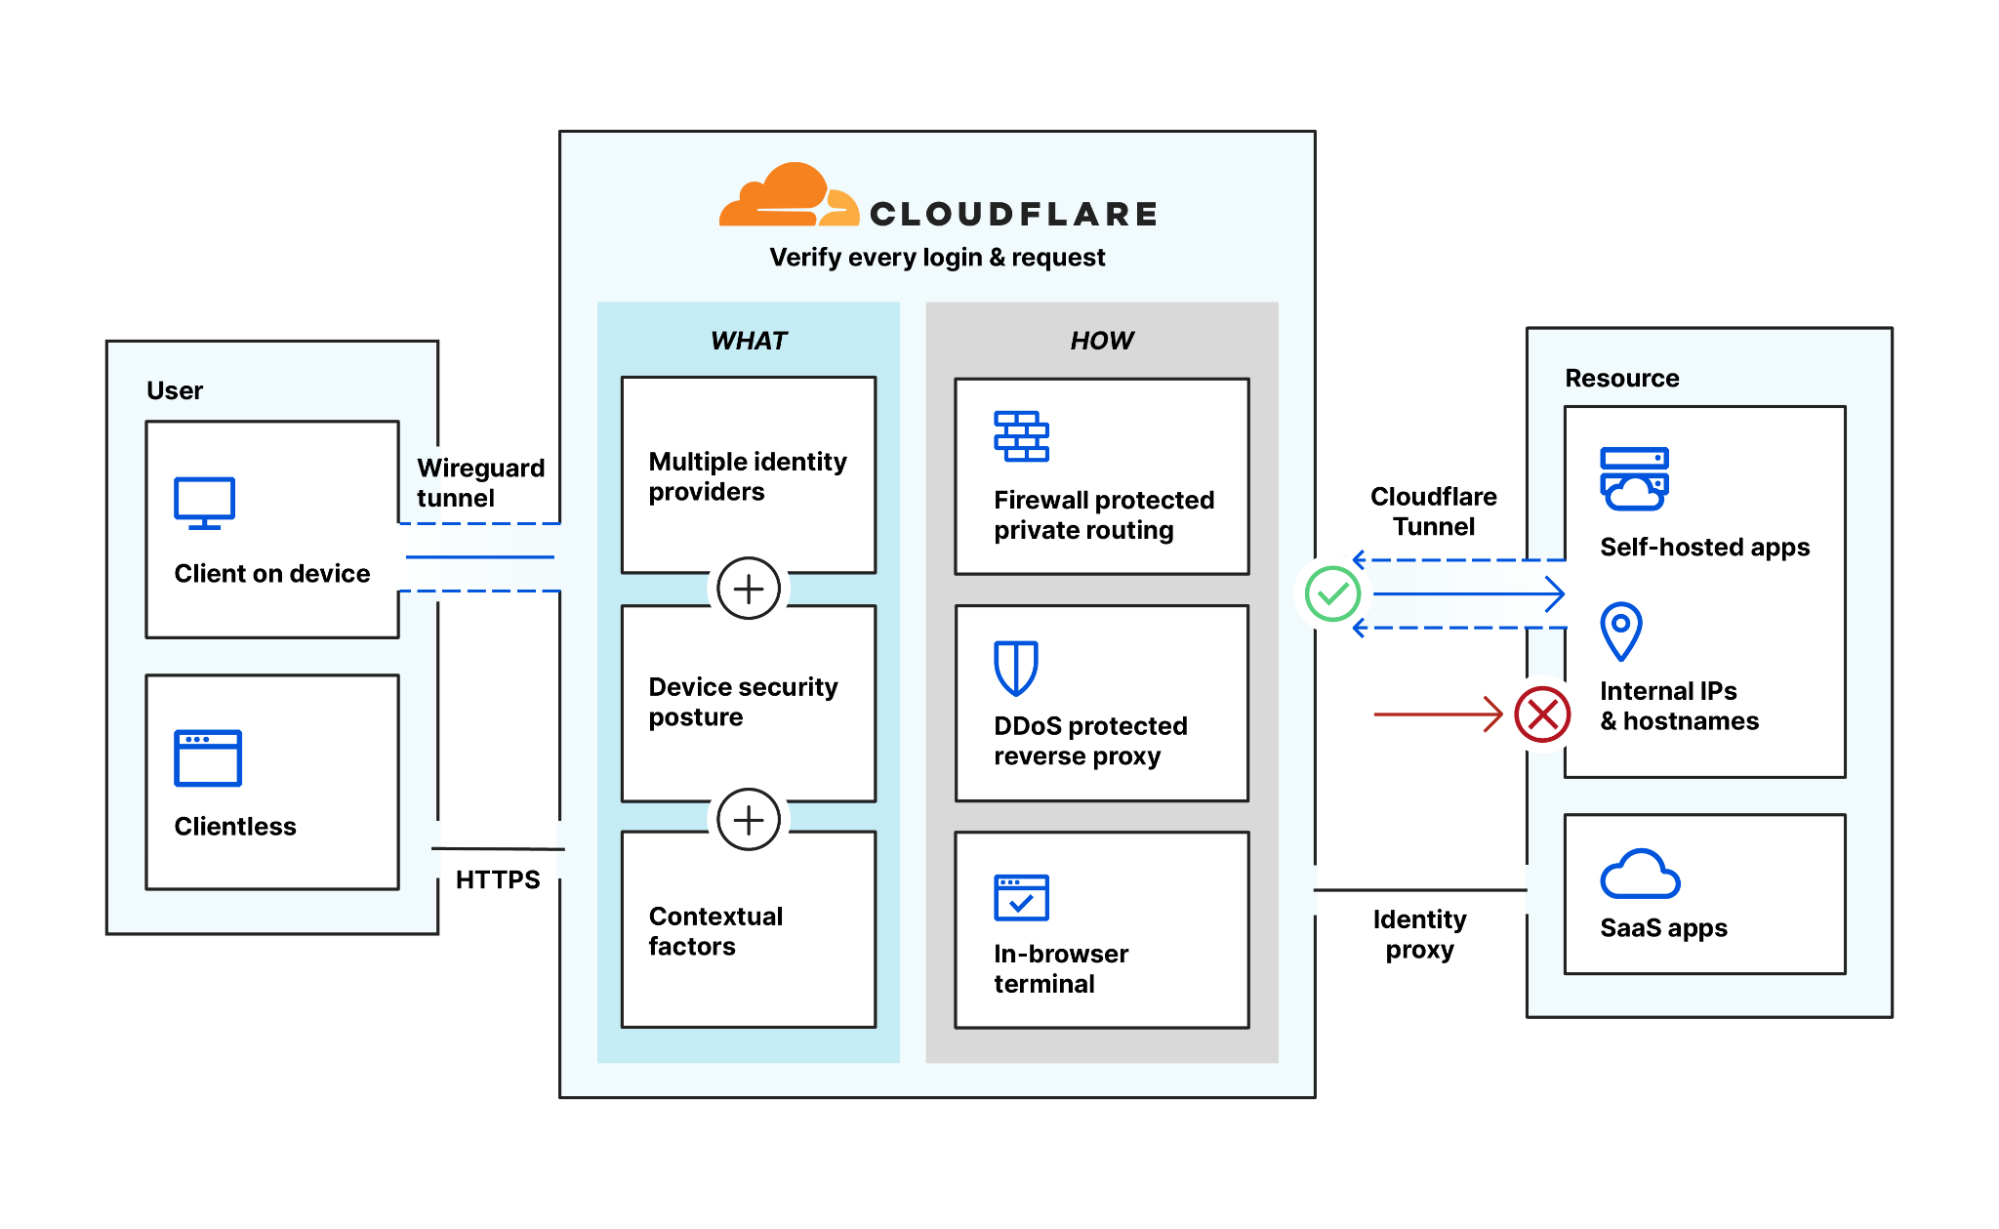 Cloudflare Access helps connect all of an organization’s users to business resources, verifying every login and request with contextual factors